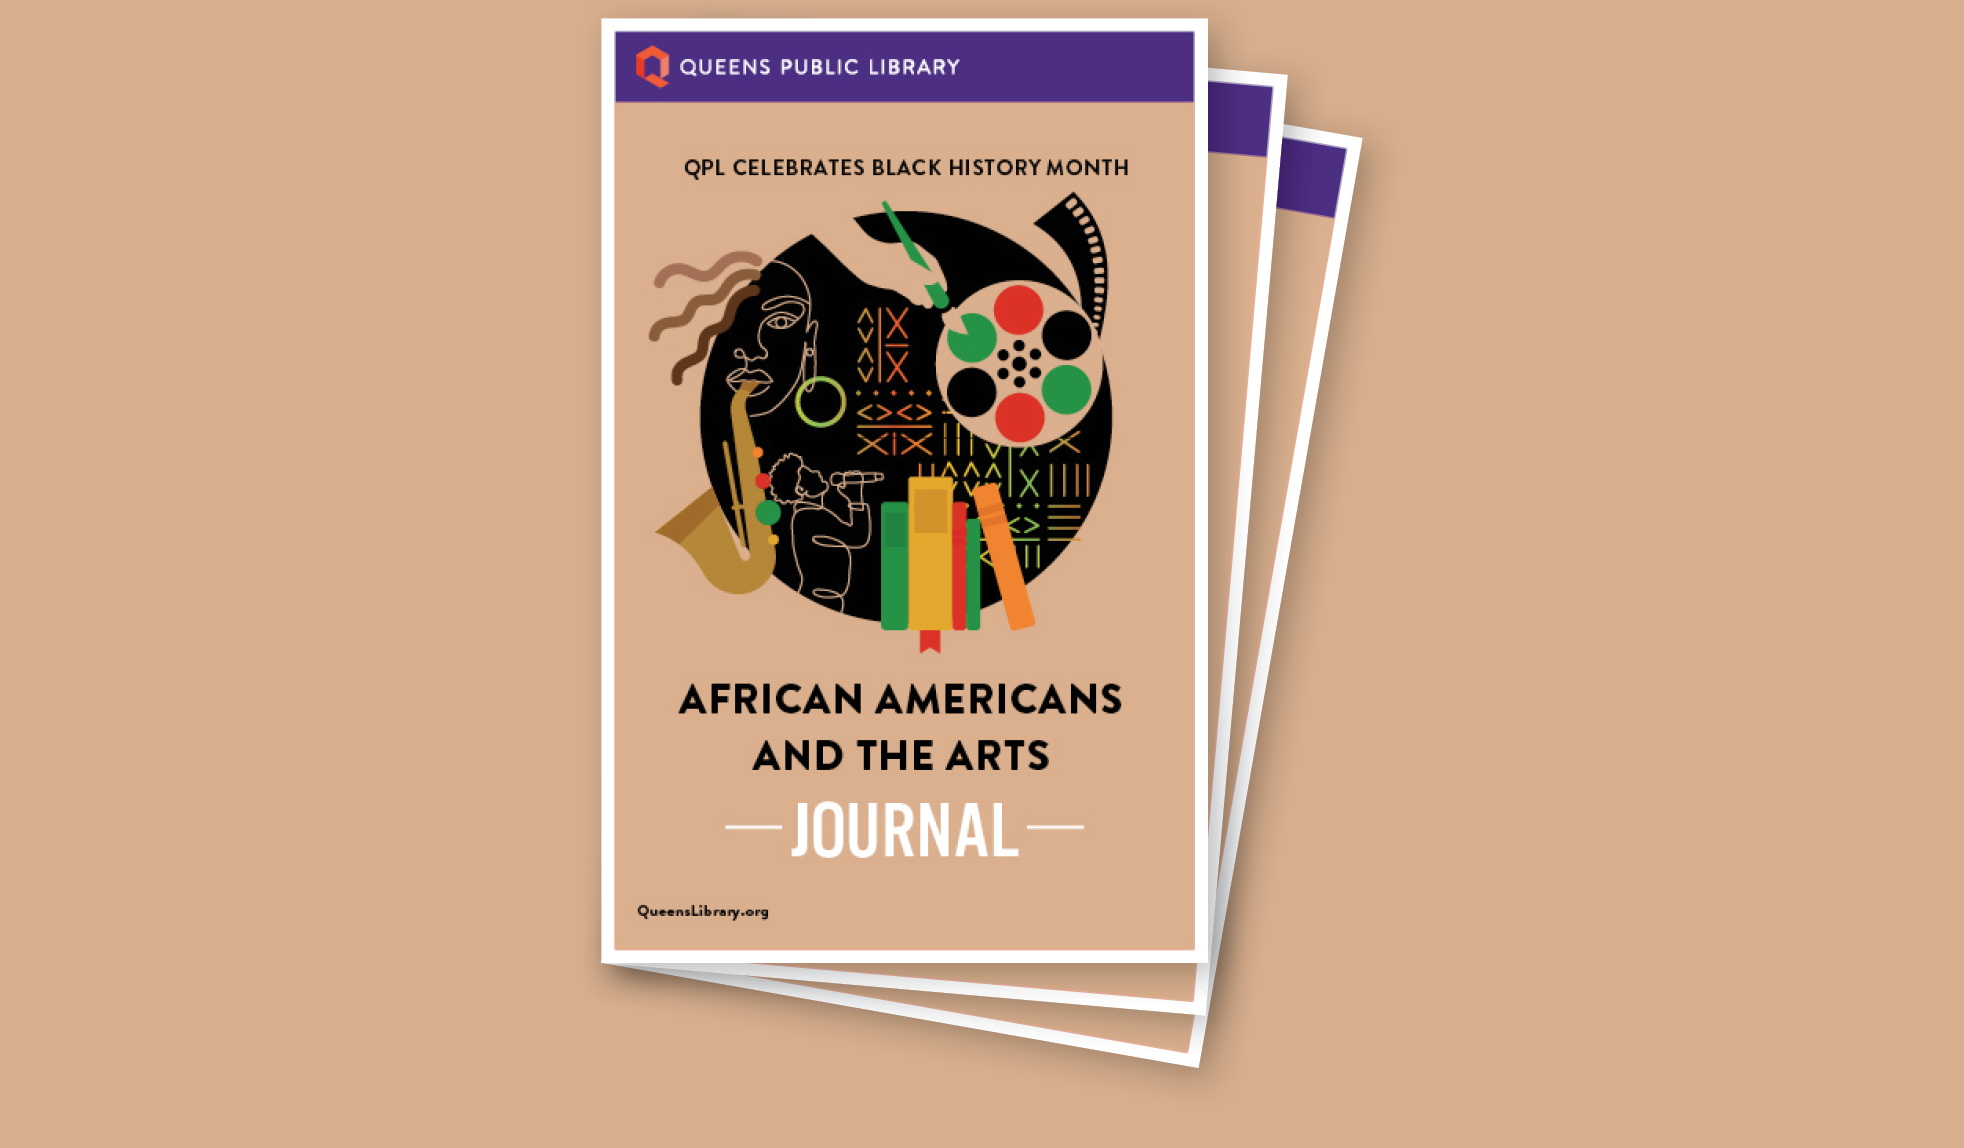 Use our Journal to reflect on Black Art and Black Artists, learn about Black Art Icons, and more!